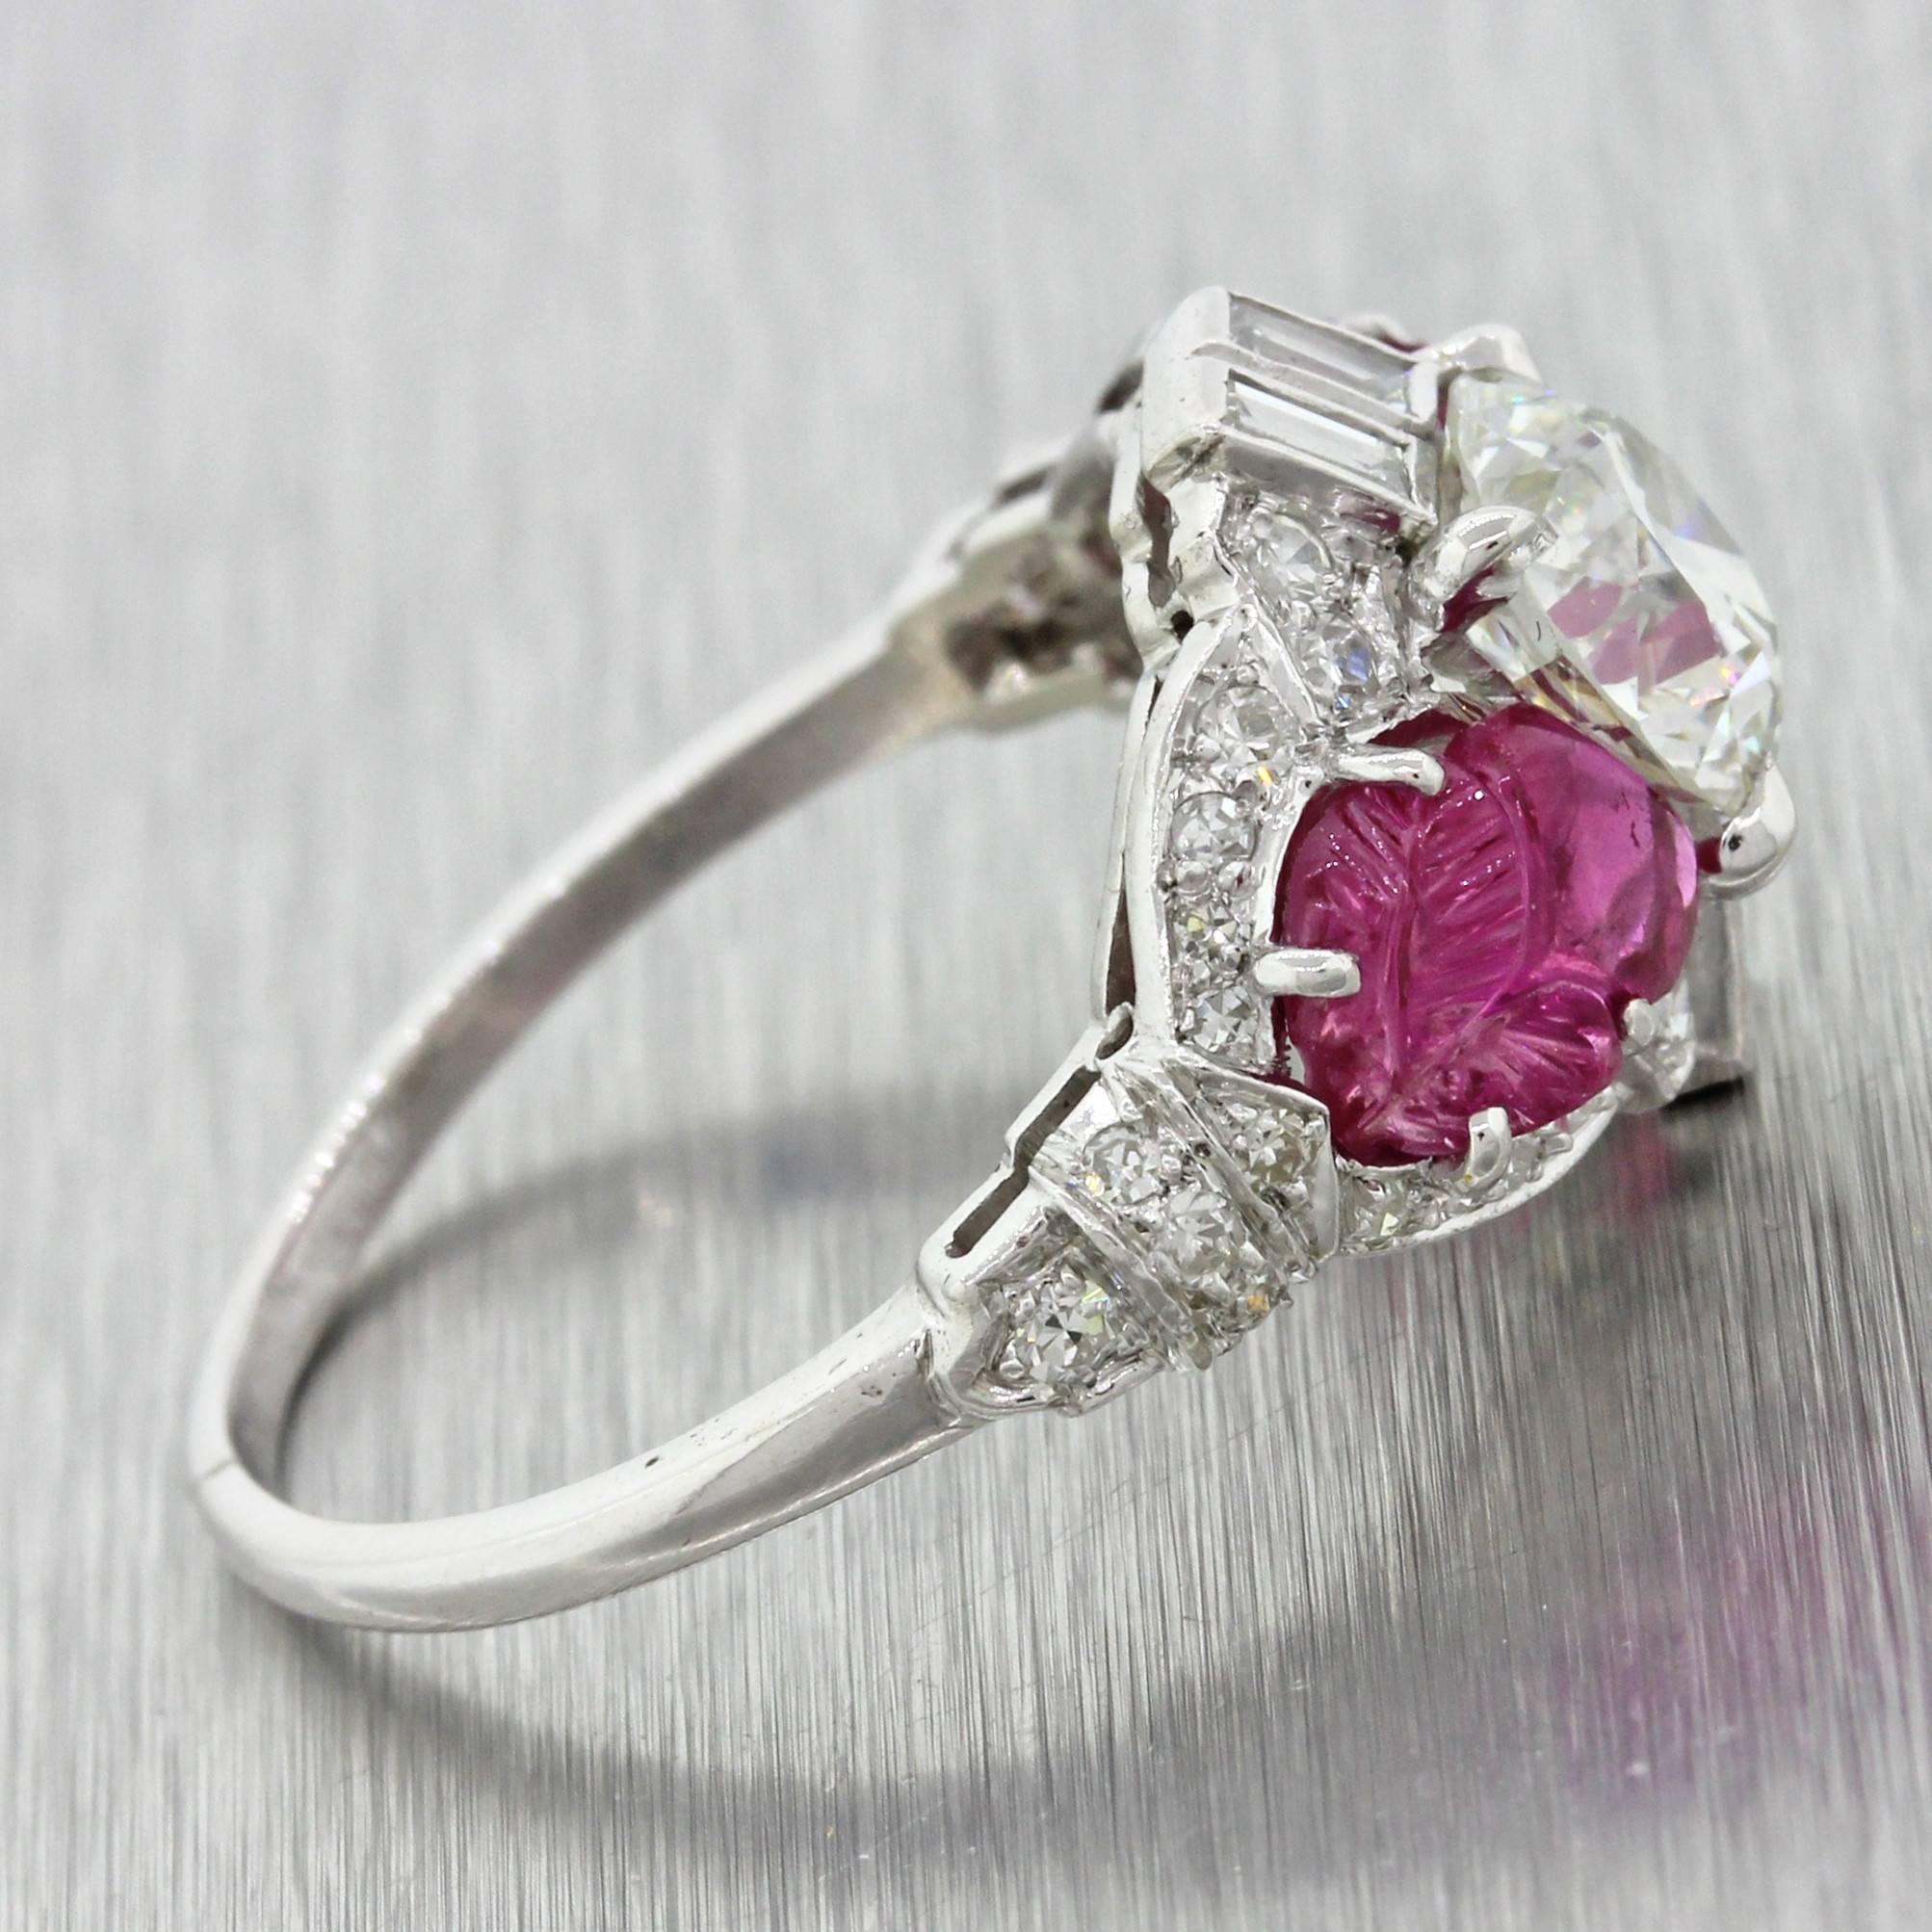 This is a beautiful 1920s Antique Art Deco Platinum 2.50ctw Diamond 2.60ctw Ruby Engagement Ring EGL. It will come in a lovely ring box for a perfect presentation and our unconditional 30 day money back return policy.

Gender 	Women's
Ring Size	8 -